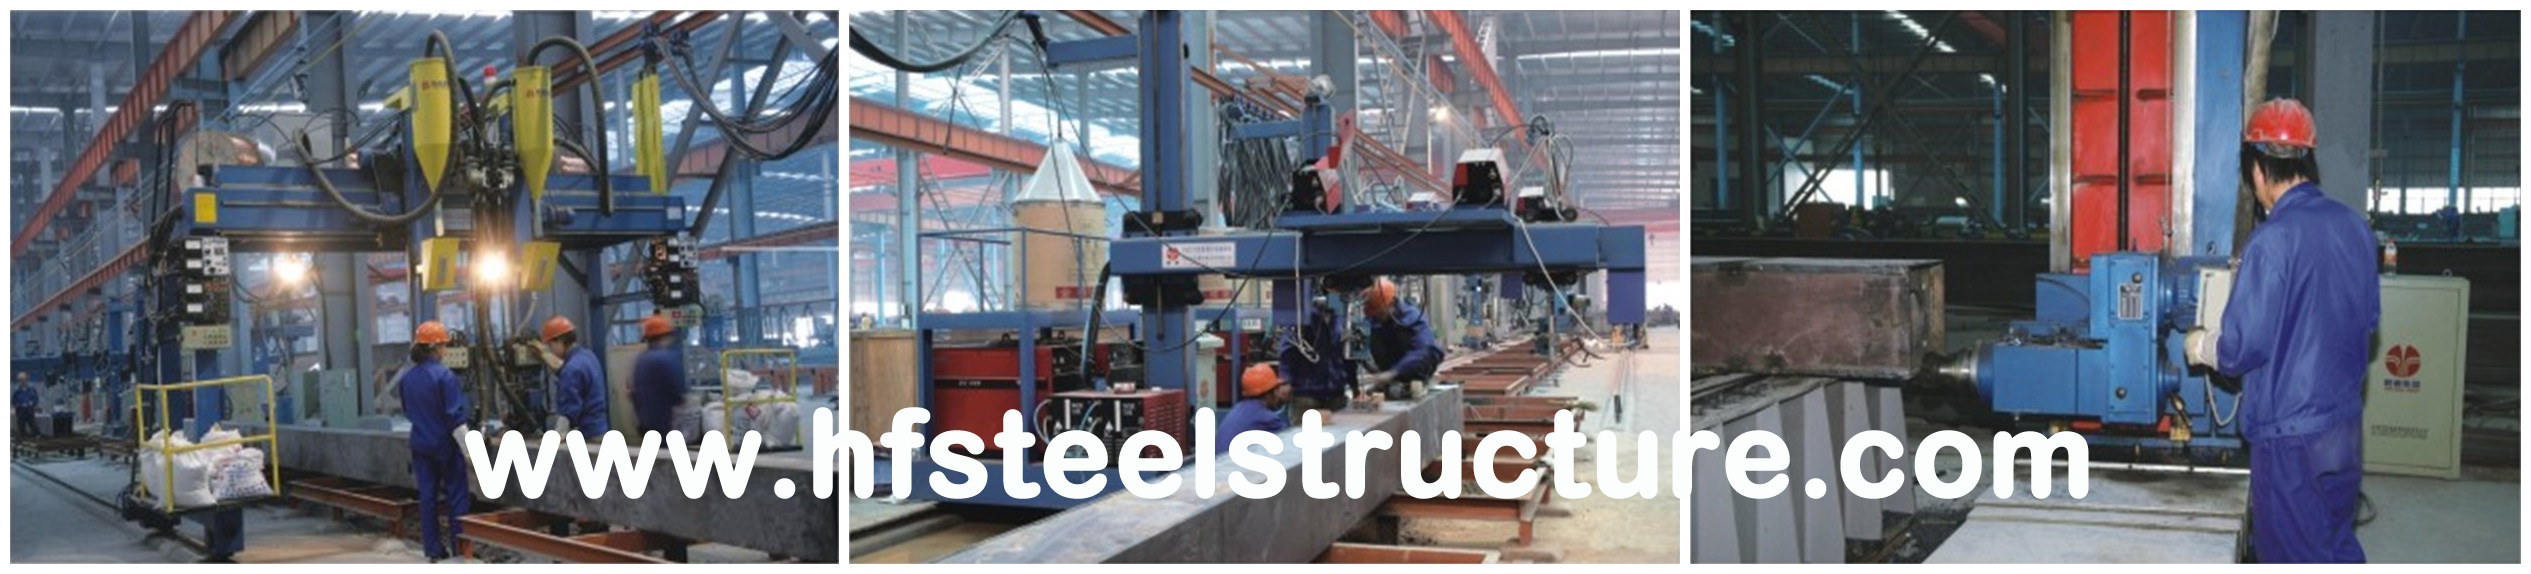 Construction Structural Steel Fabrications With Standards ASTM JIS NZS EN